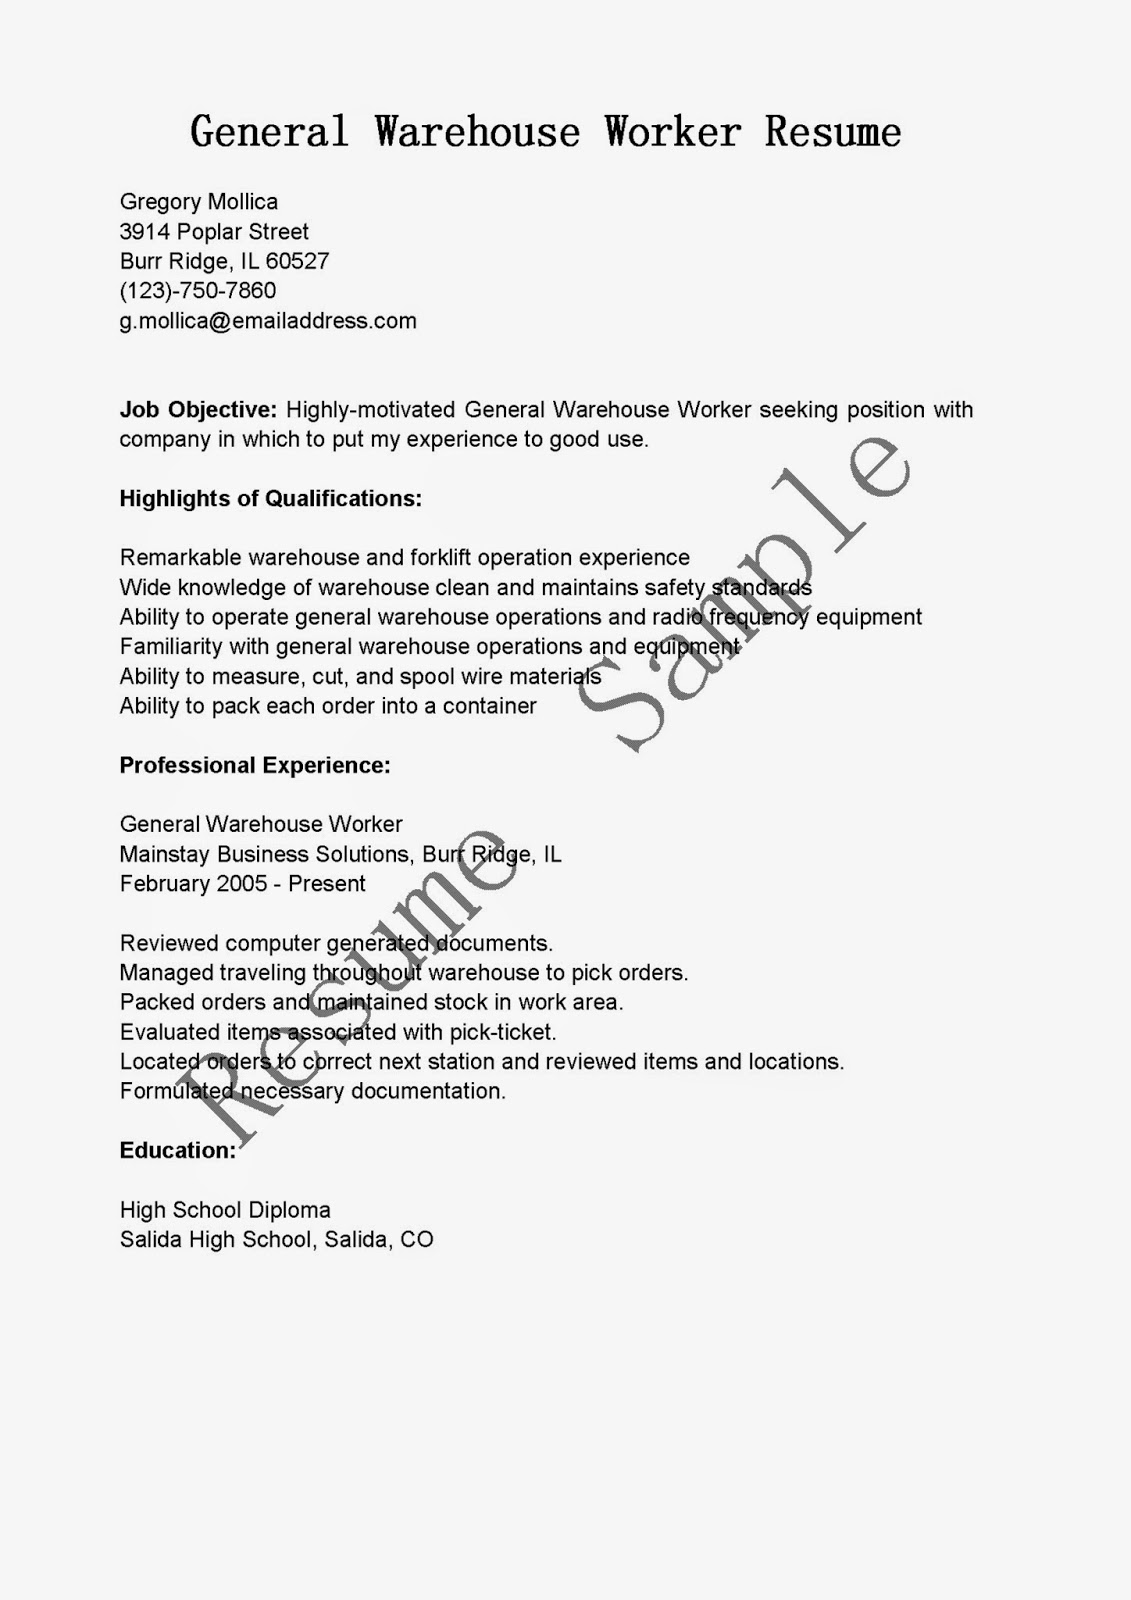 Supply chain management objectives in resume